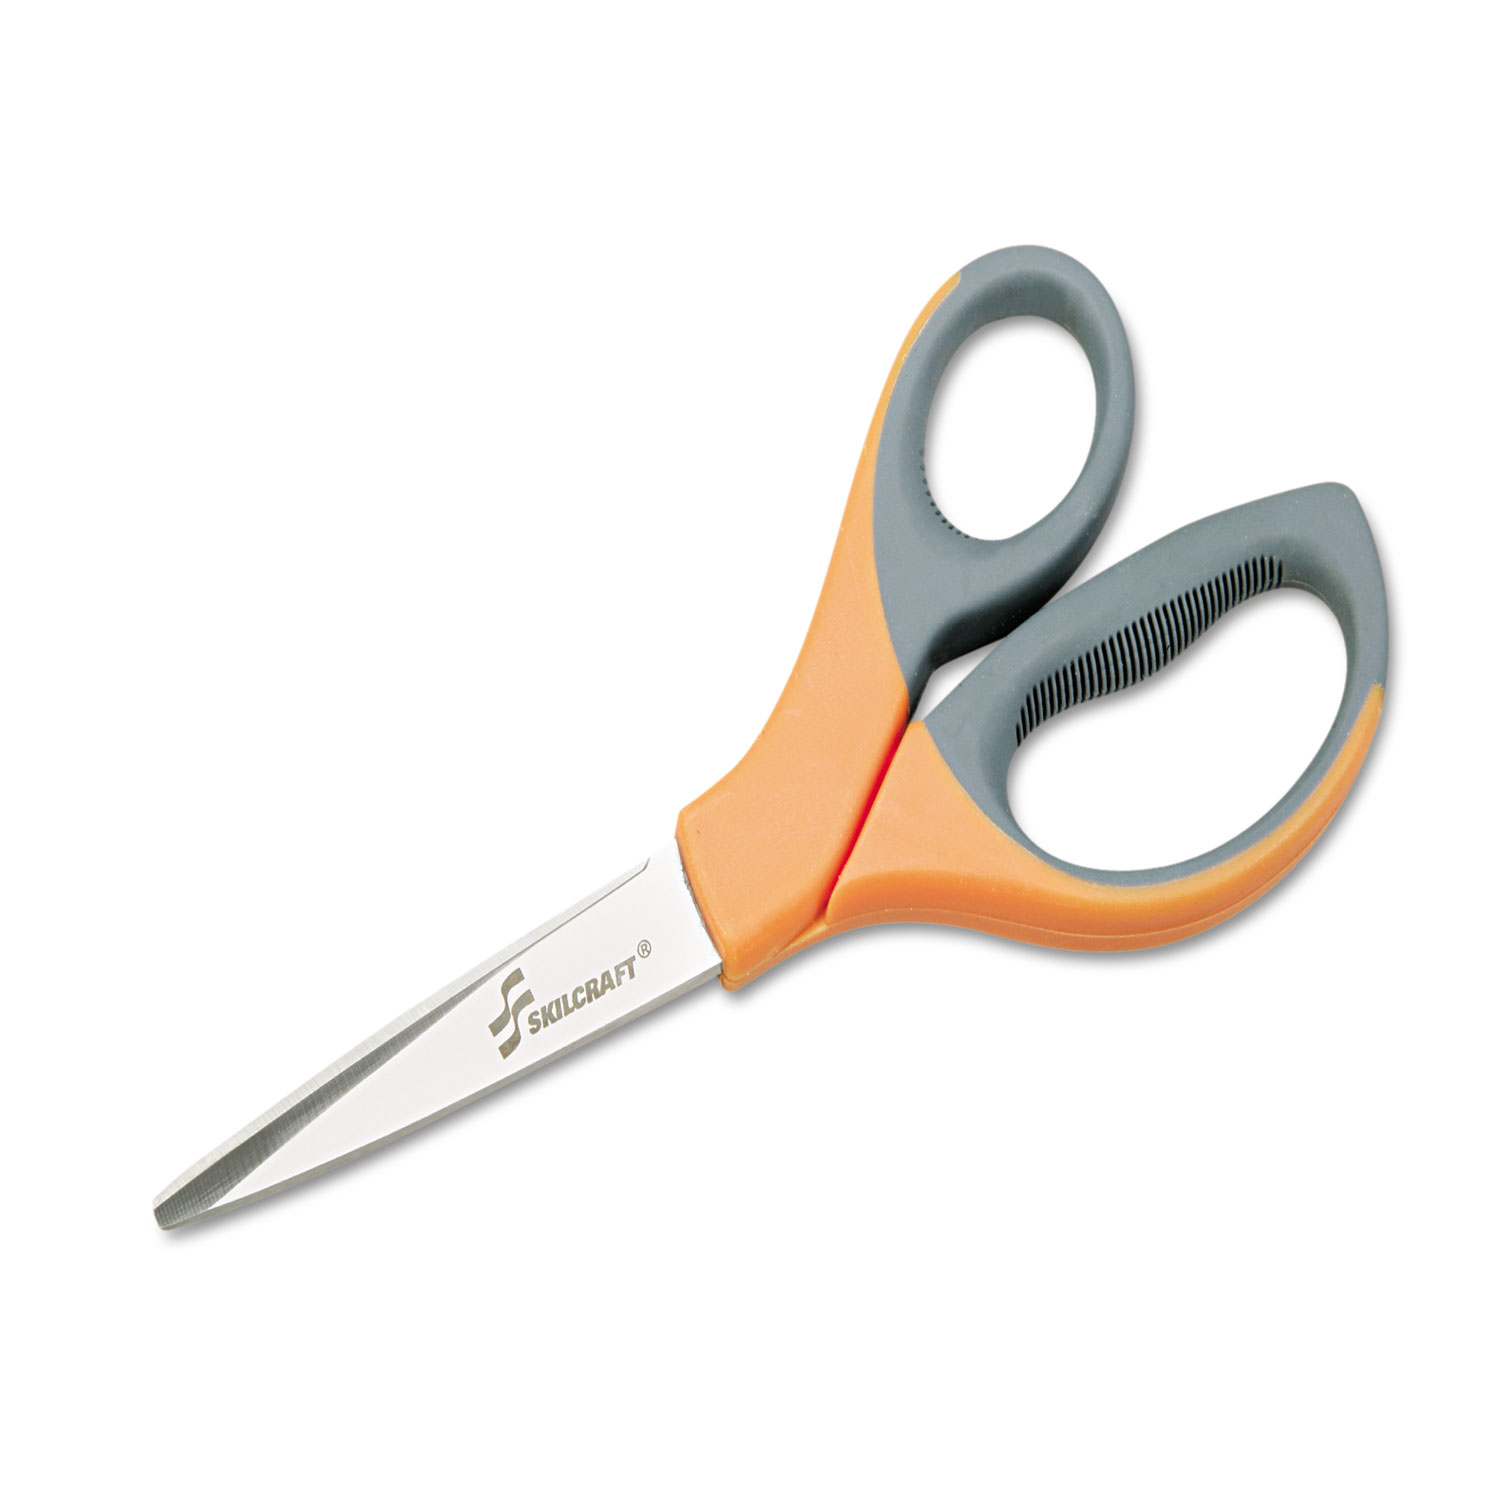 Global Stainless Steel 8.25 Kitchen Shears